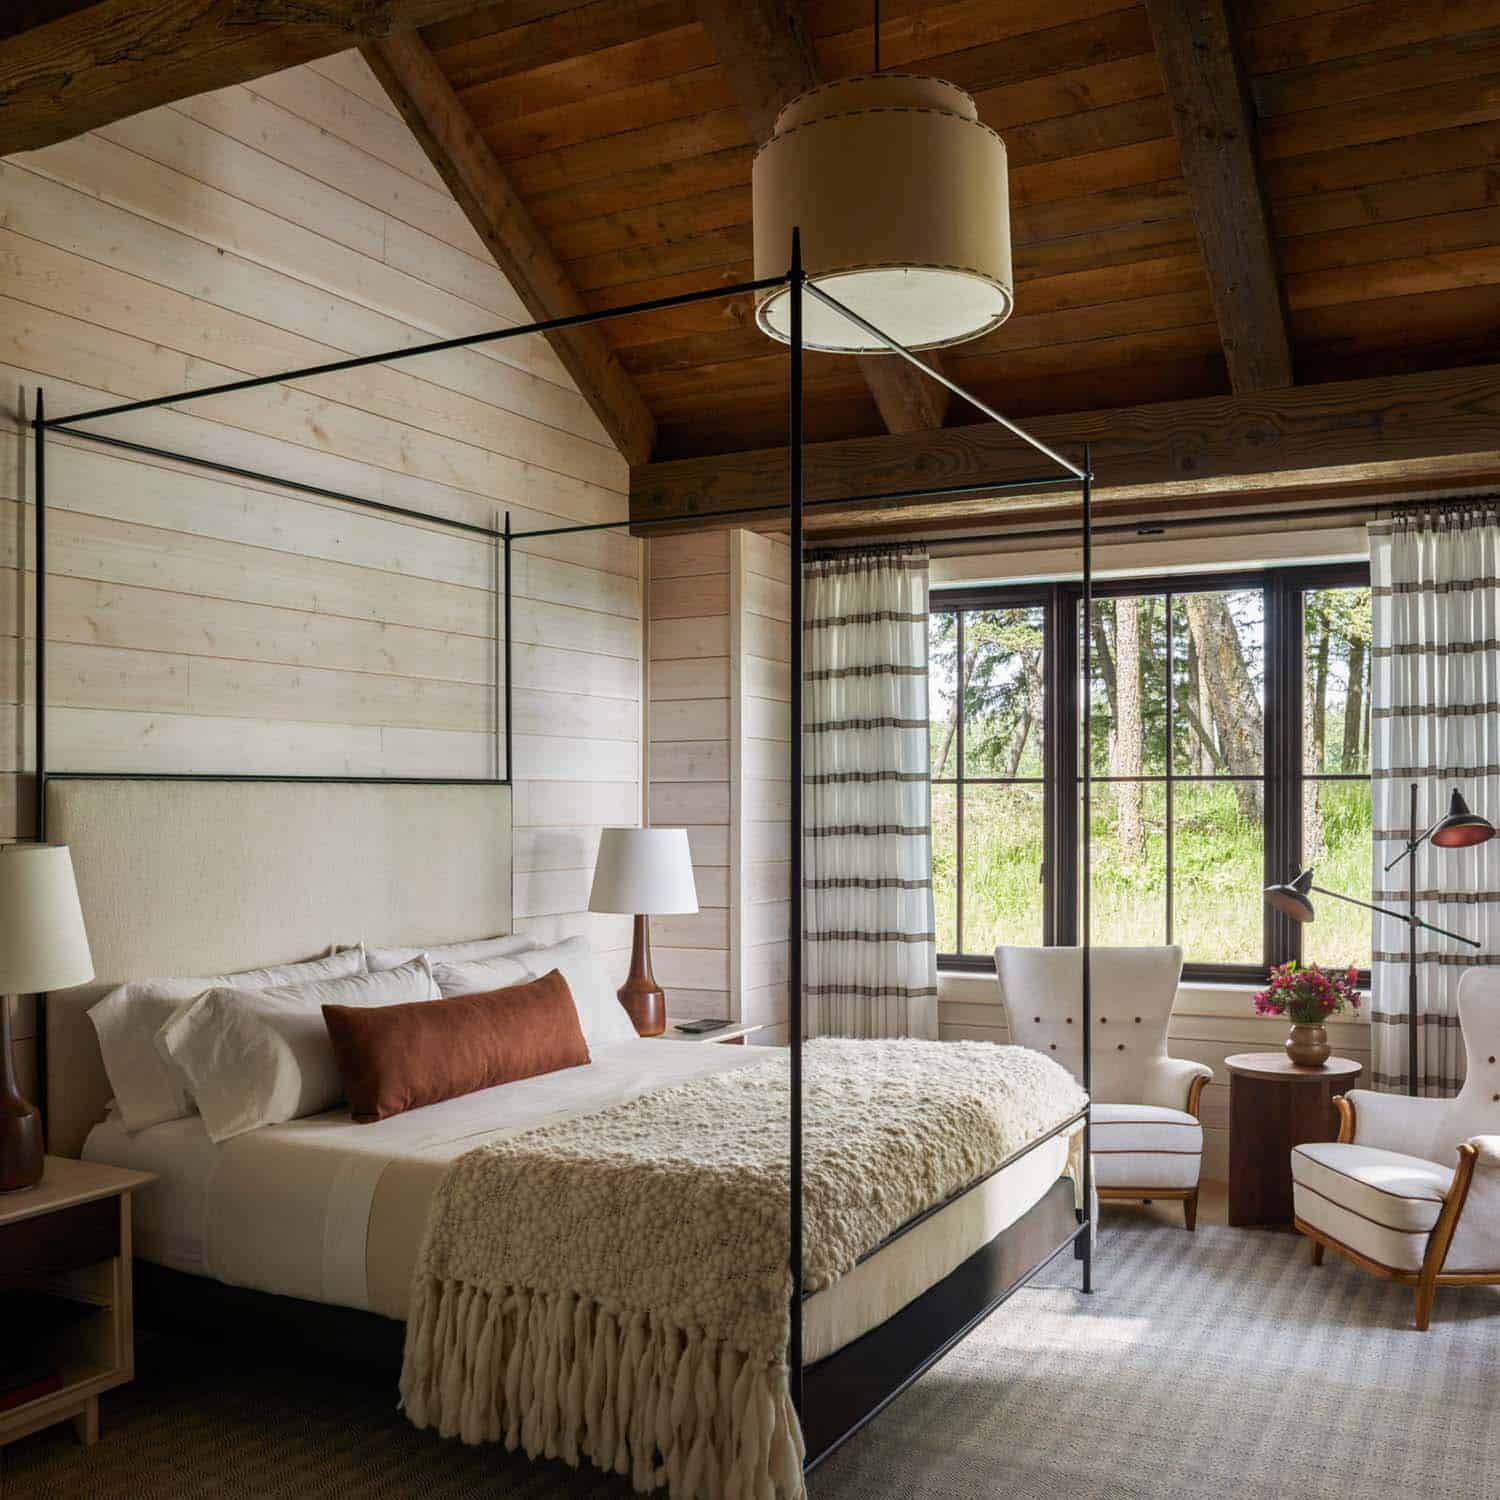 modern rustic bedroom with a canopy bed and vaulted ceiling